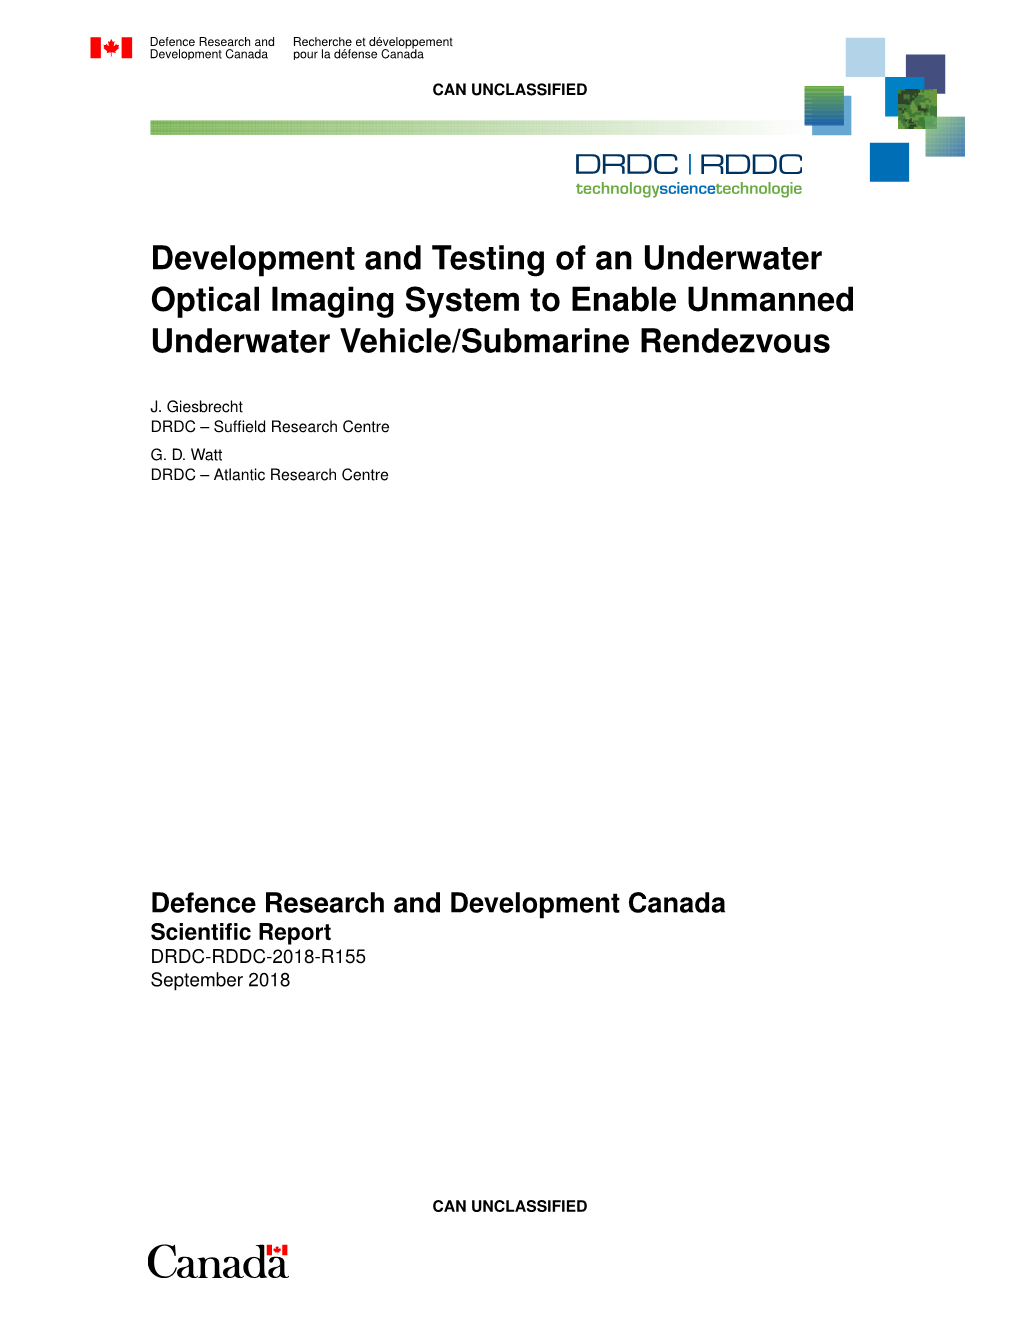 Development and Testing of an Underwater Optical Imaging System to Enable Unmanned Underwater Vehicle/Submarine Rendezvous